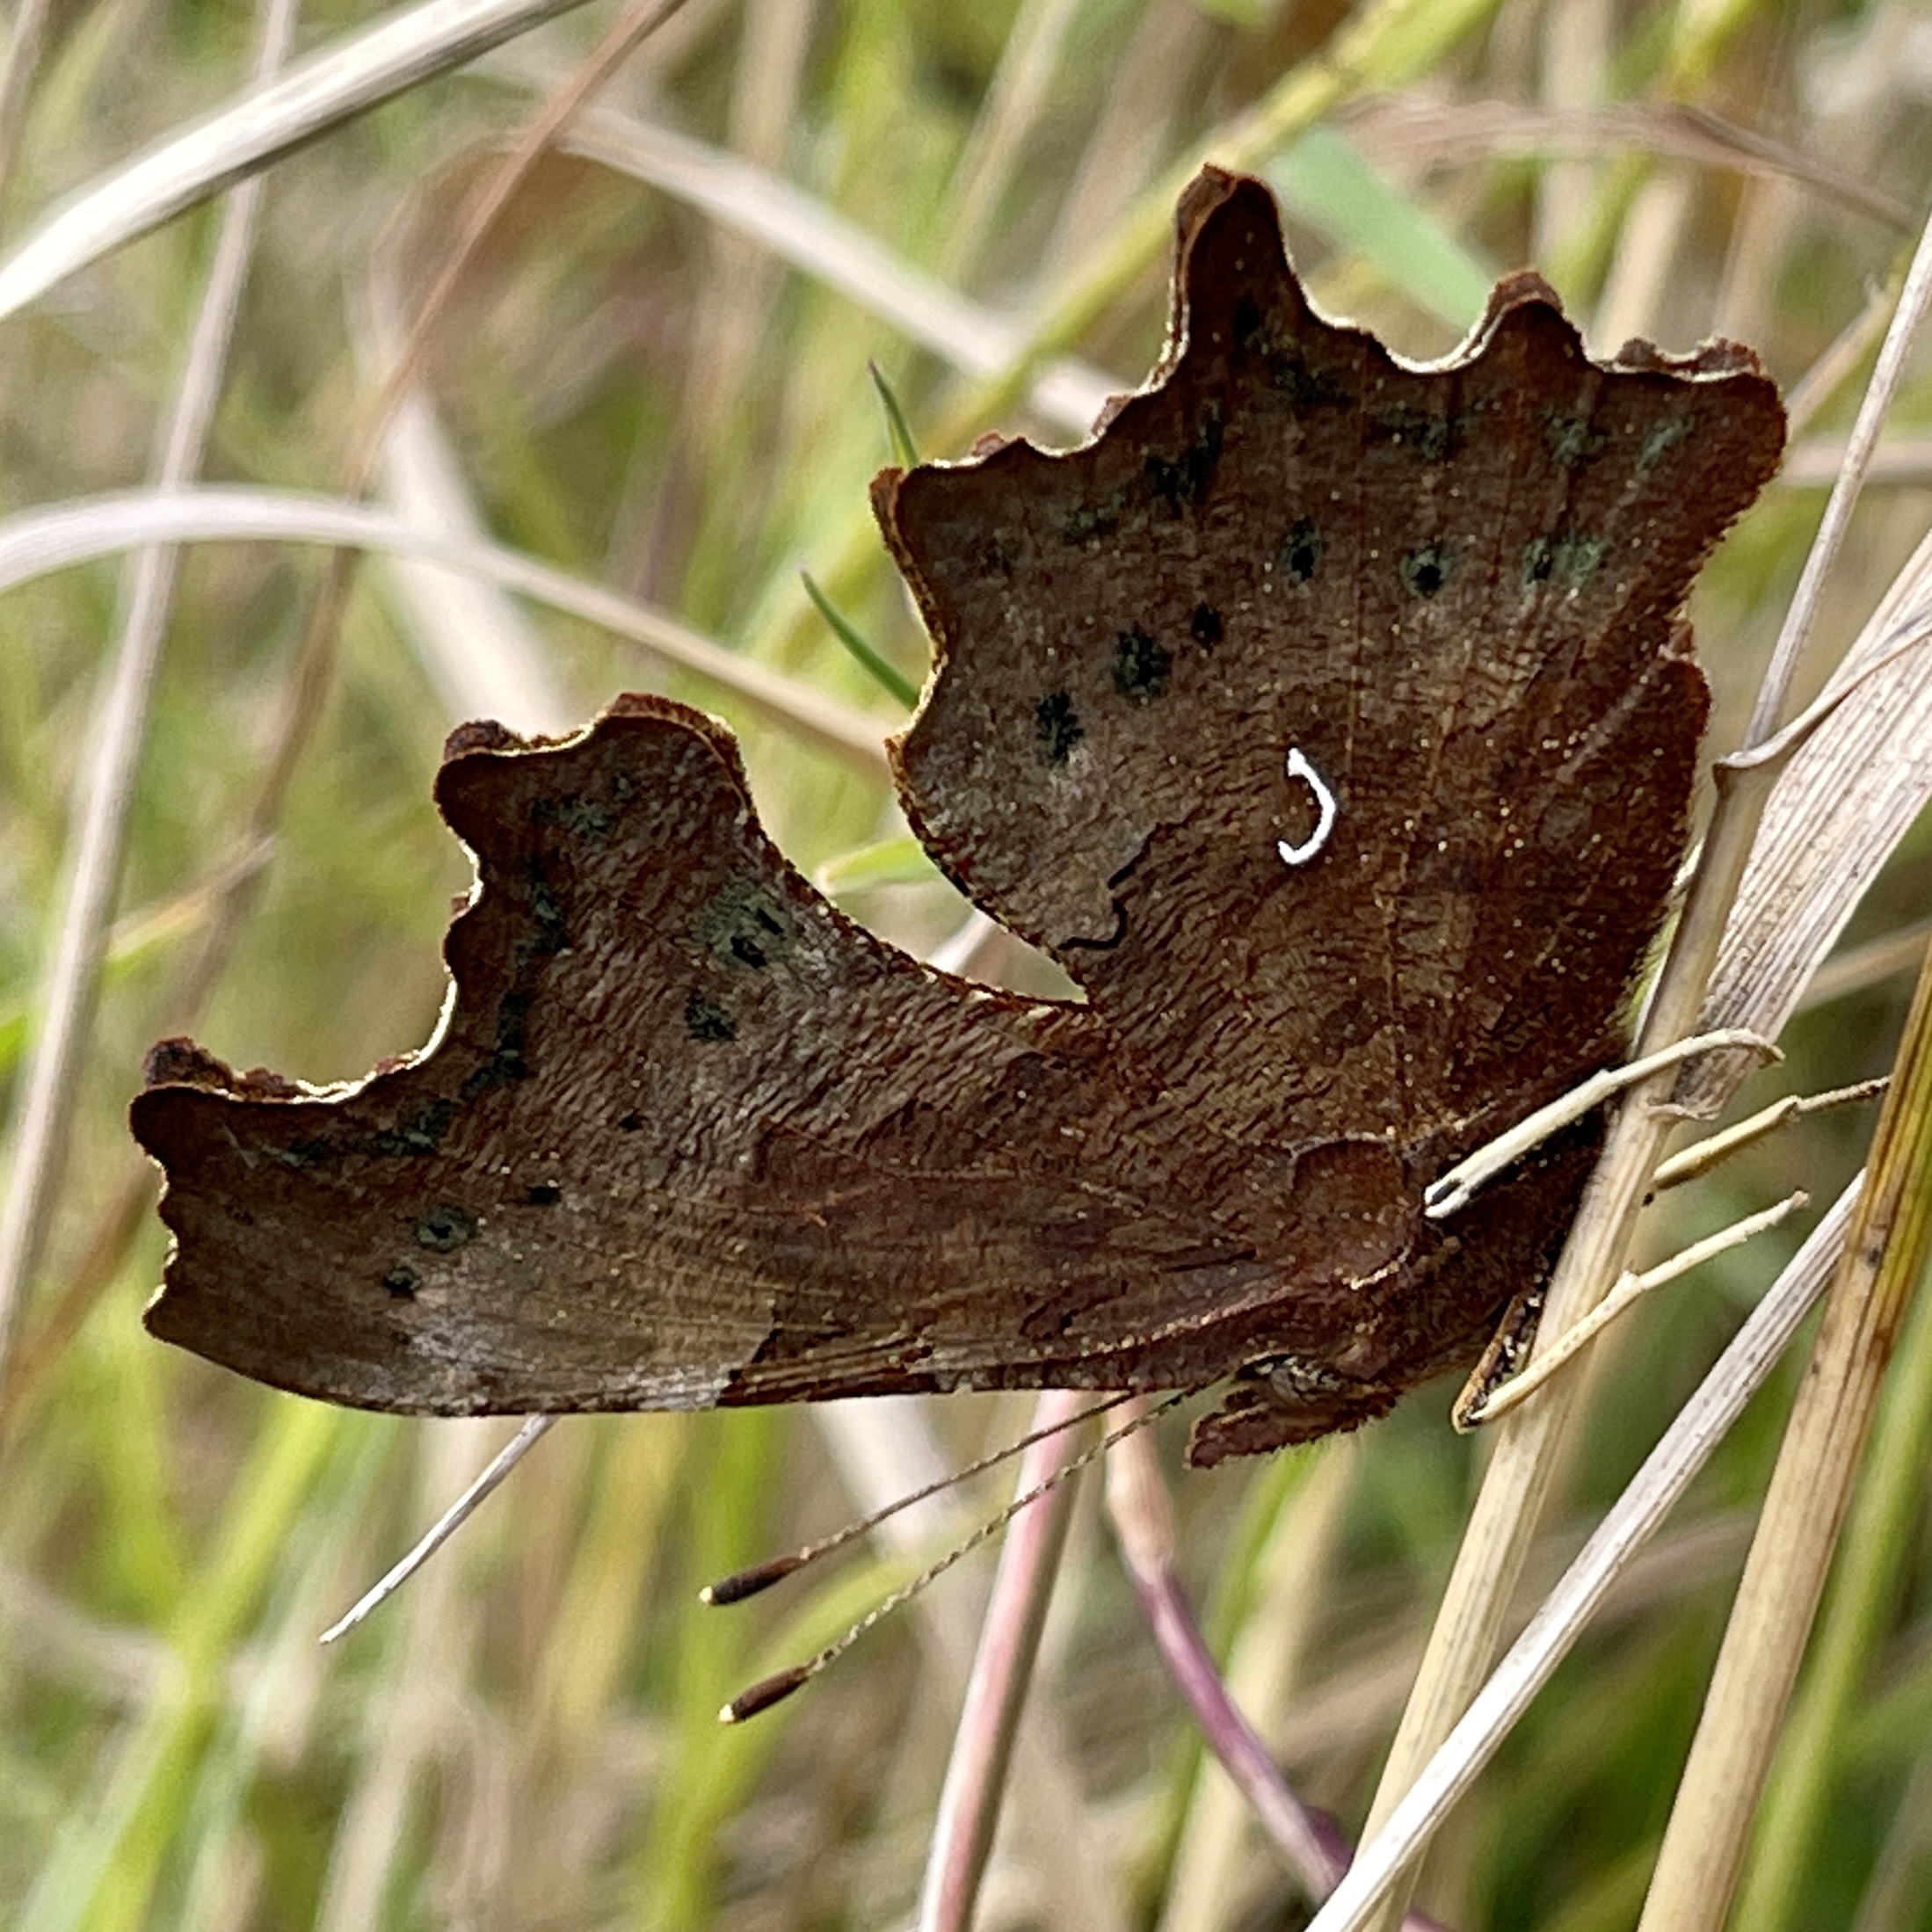 a moth or butterfly pretending to be a leaf